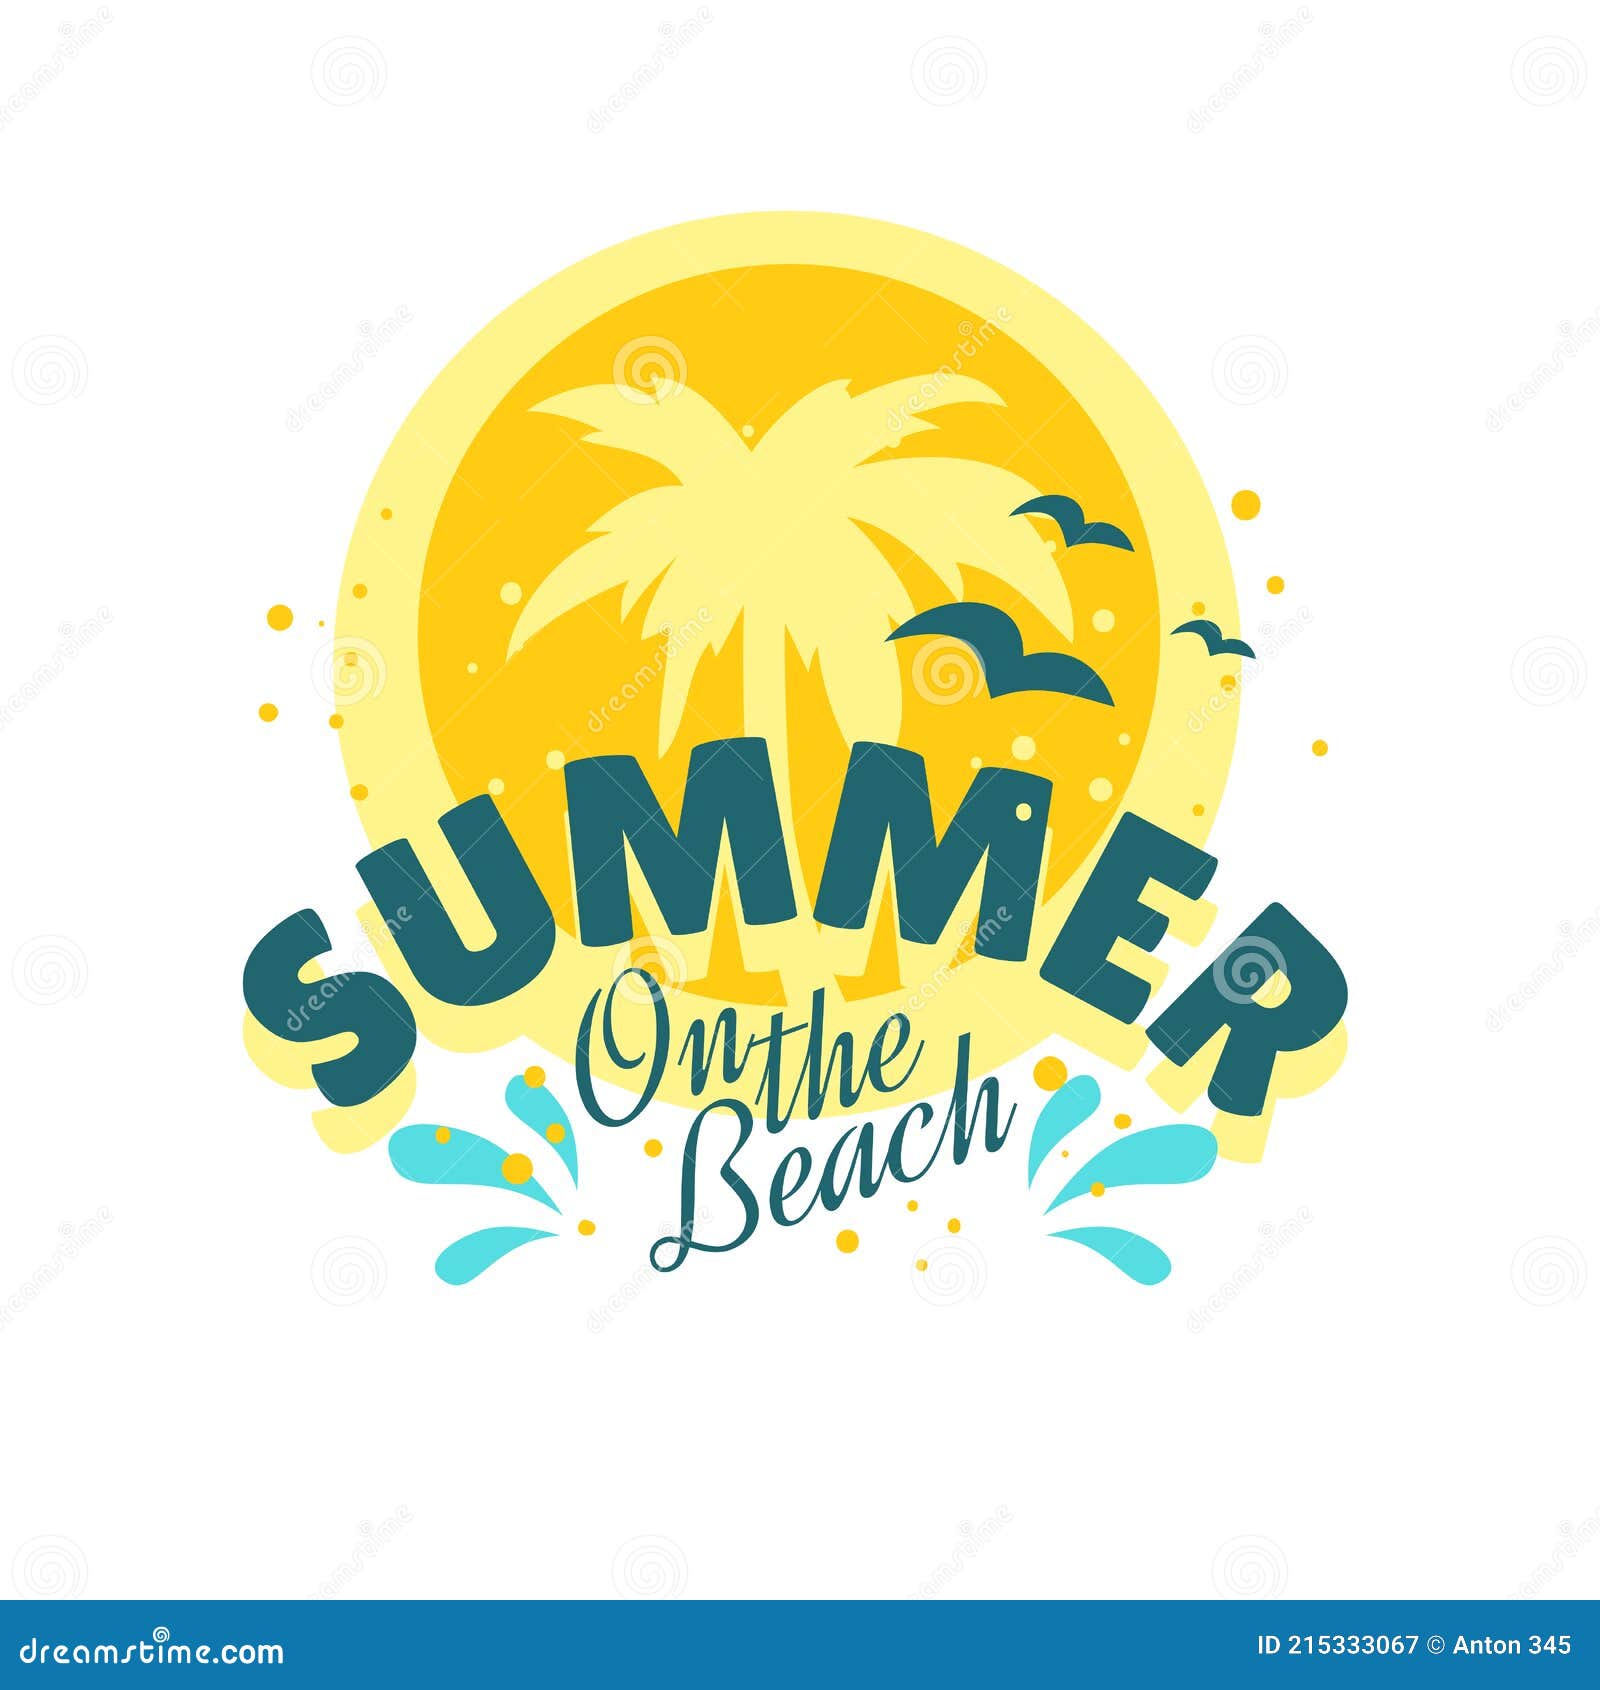 Free Vector  Summer time text on illustrated beach